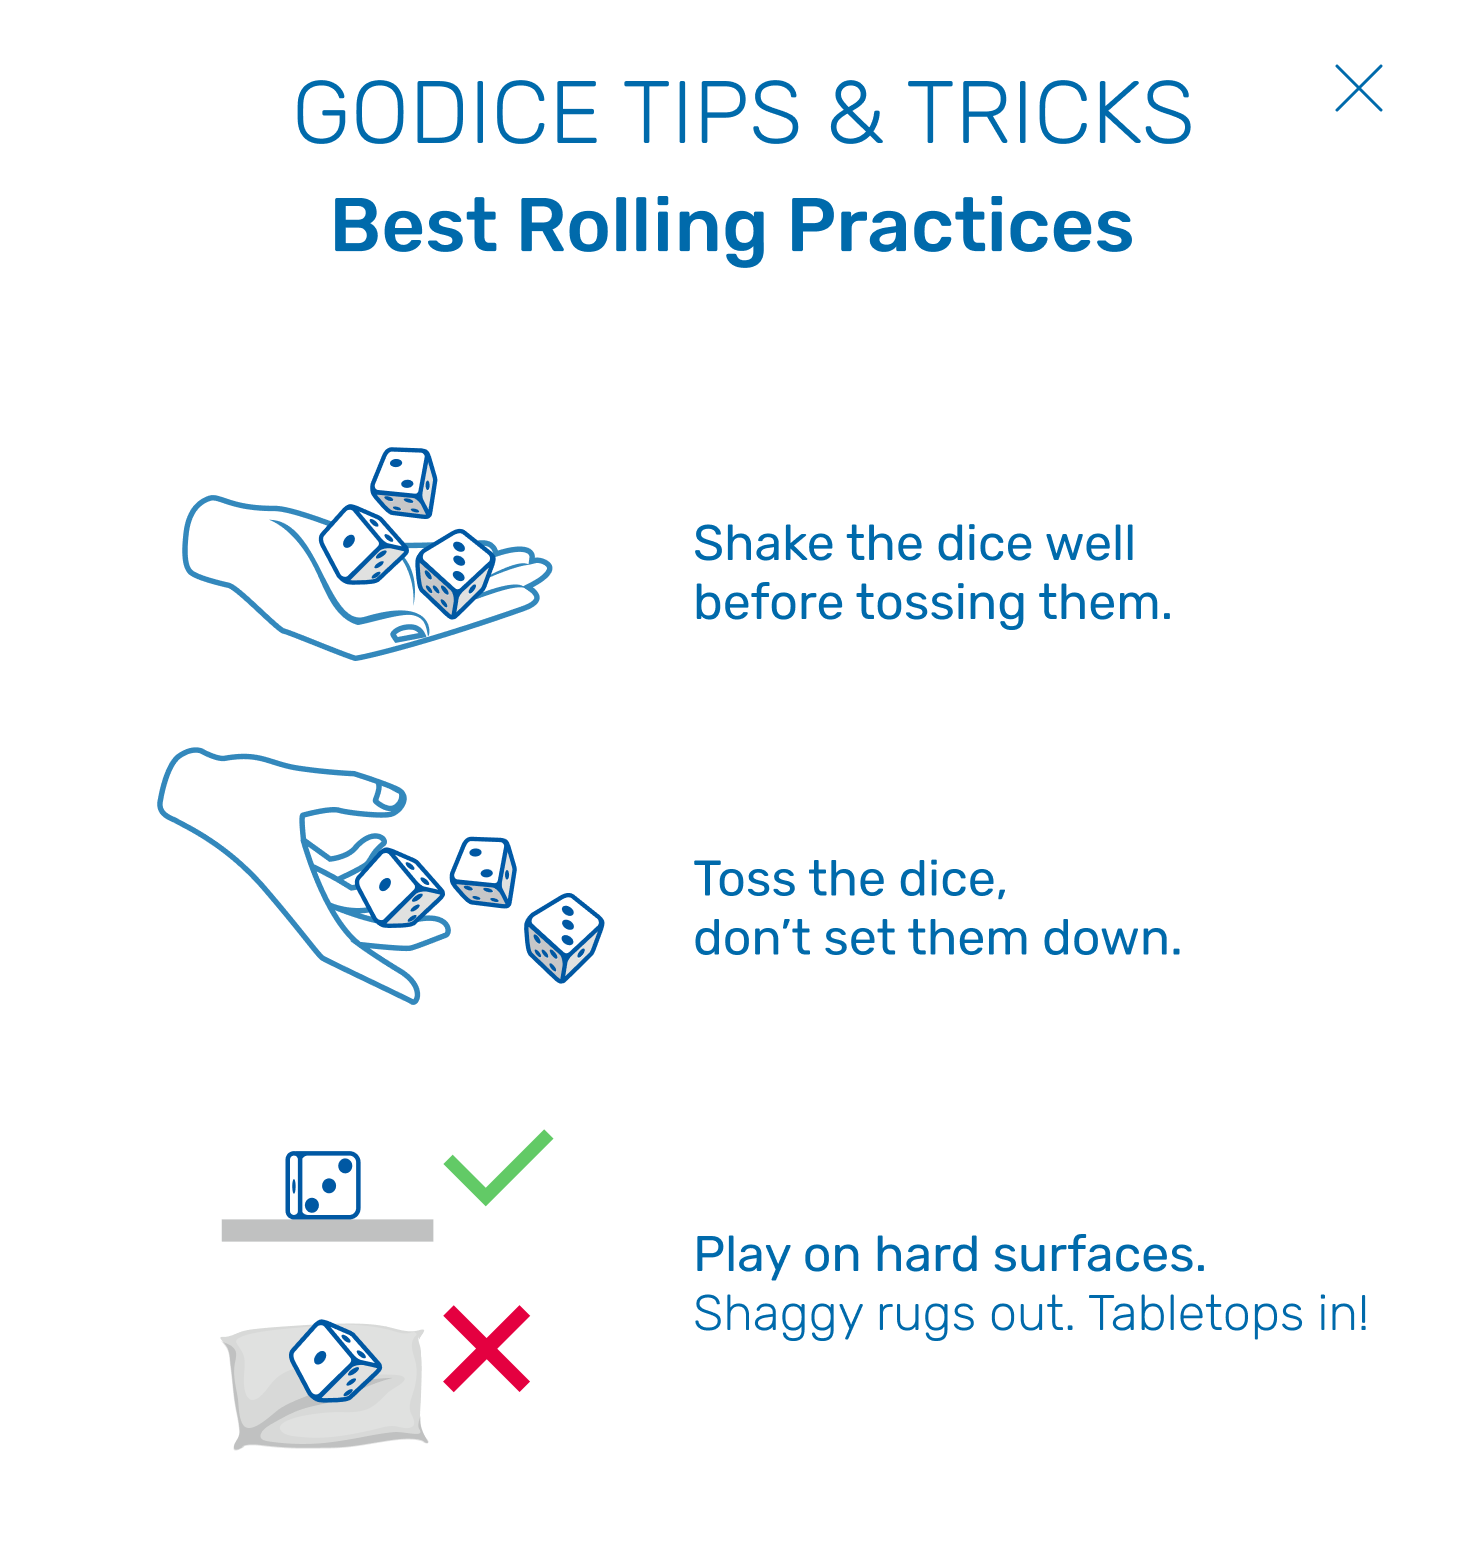 Tips_and_Tricks_01.png